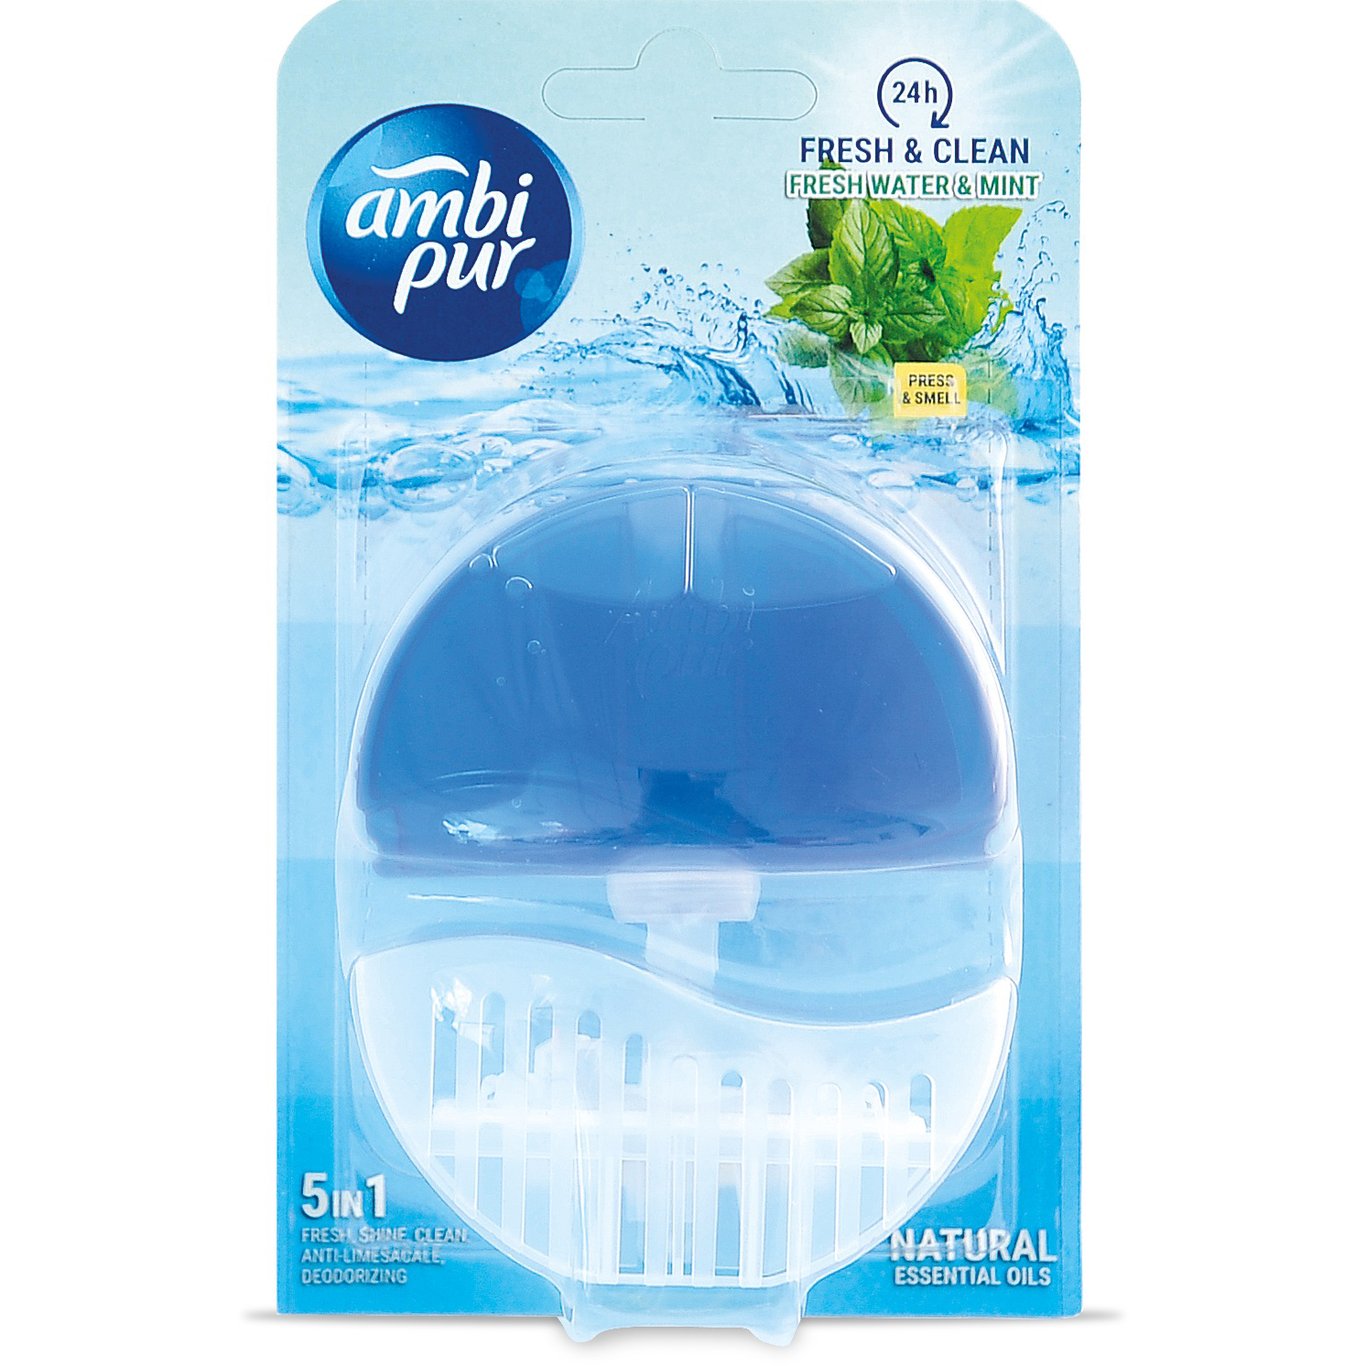 AMBI PUR WATER & MINT STARTER PACK